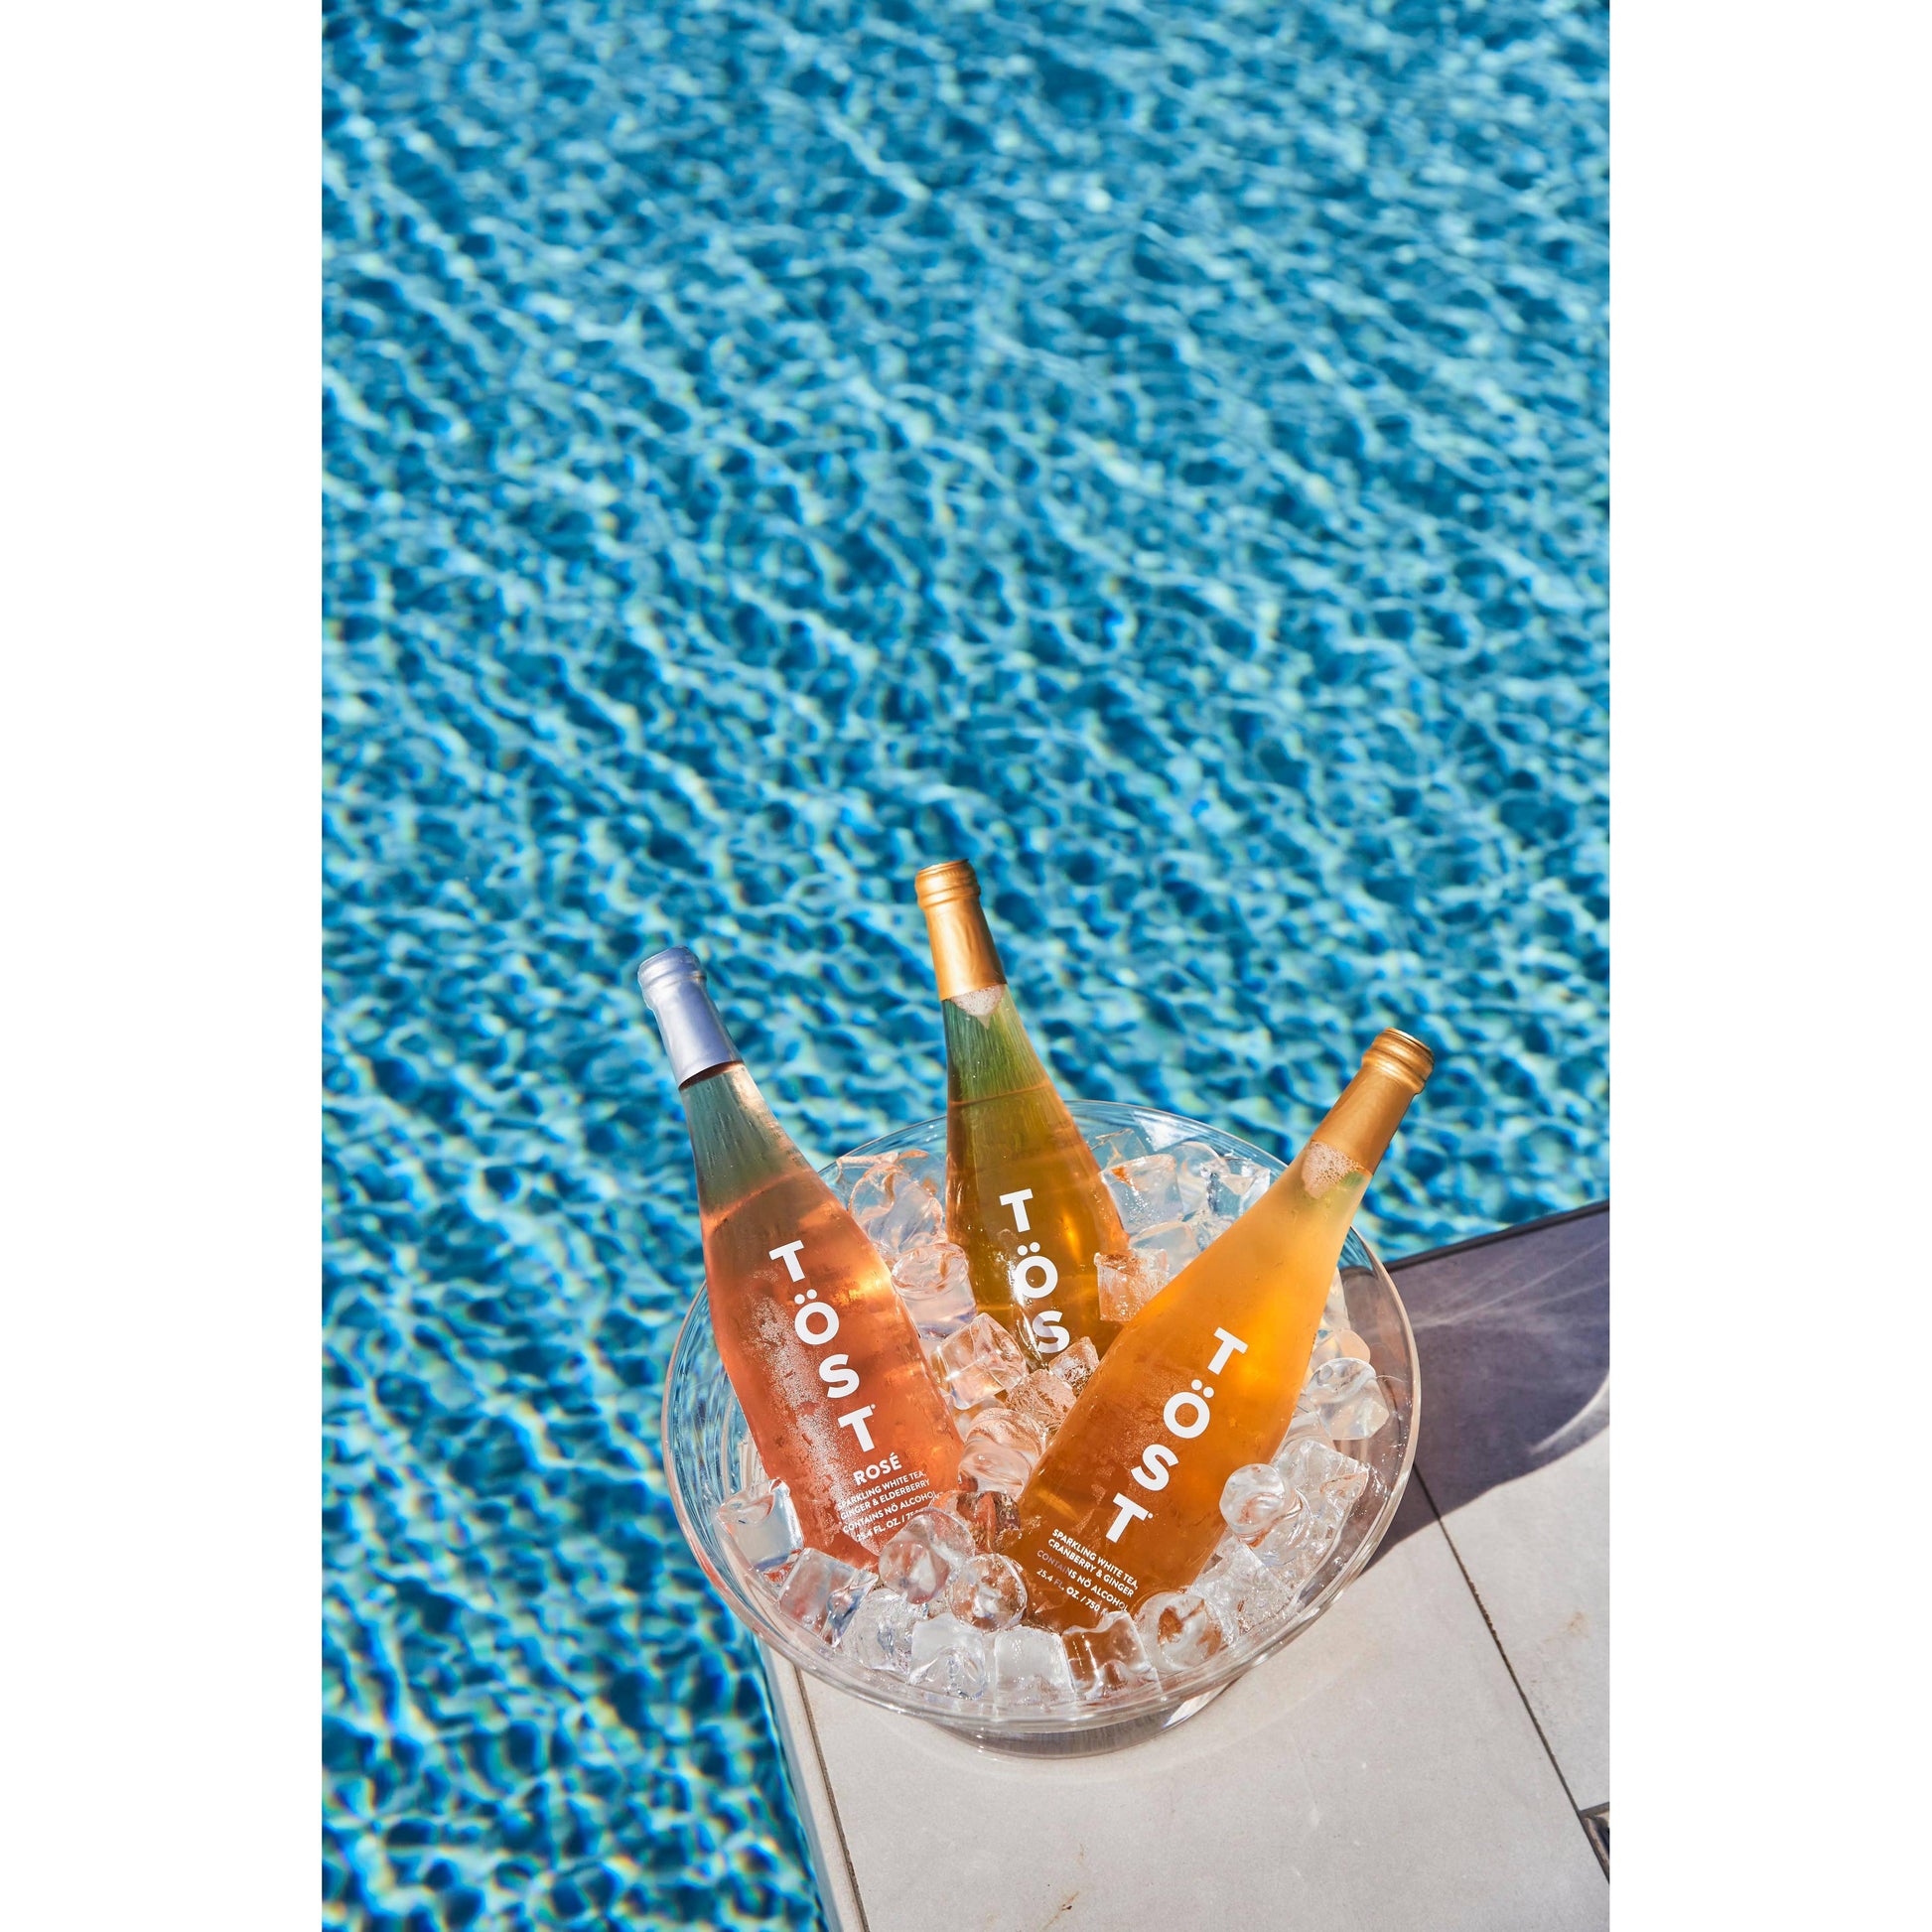 Three bottles of TÖST ROSÉ chilling in a bucket of ice beside a swimming pool with clear blue water.